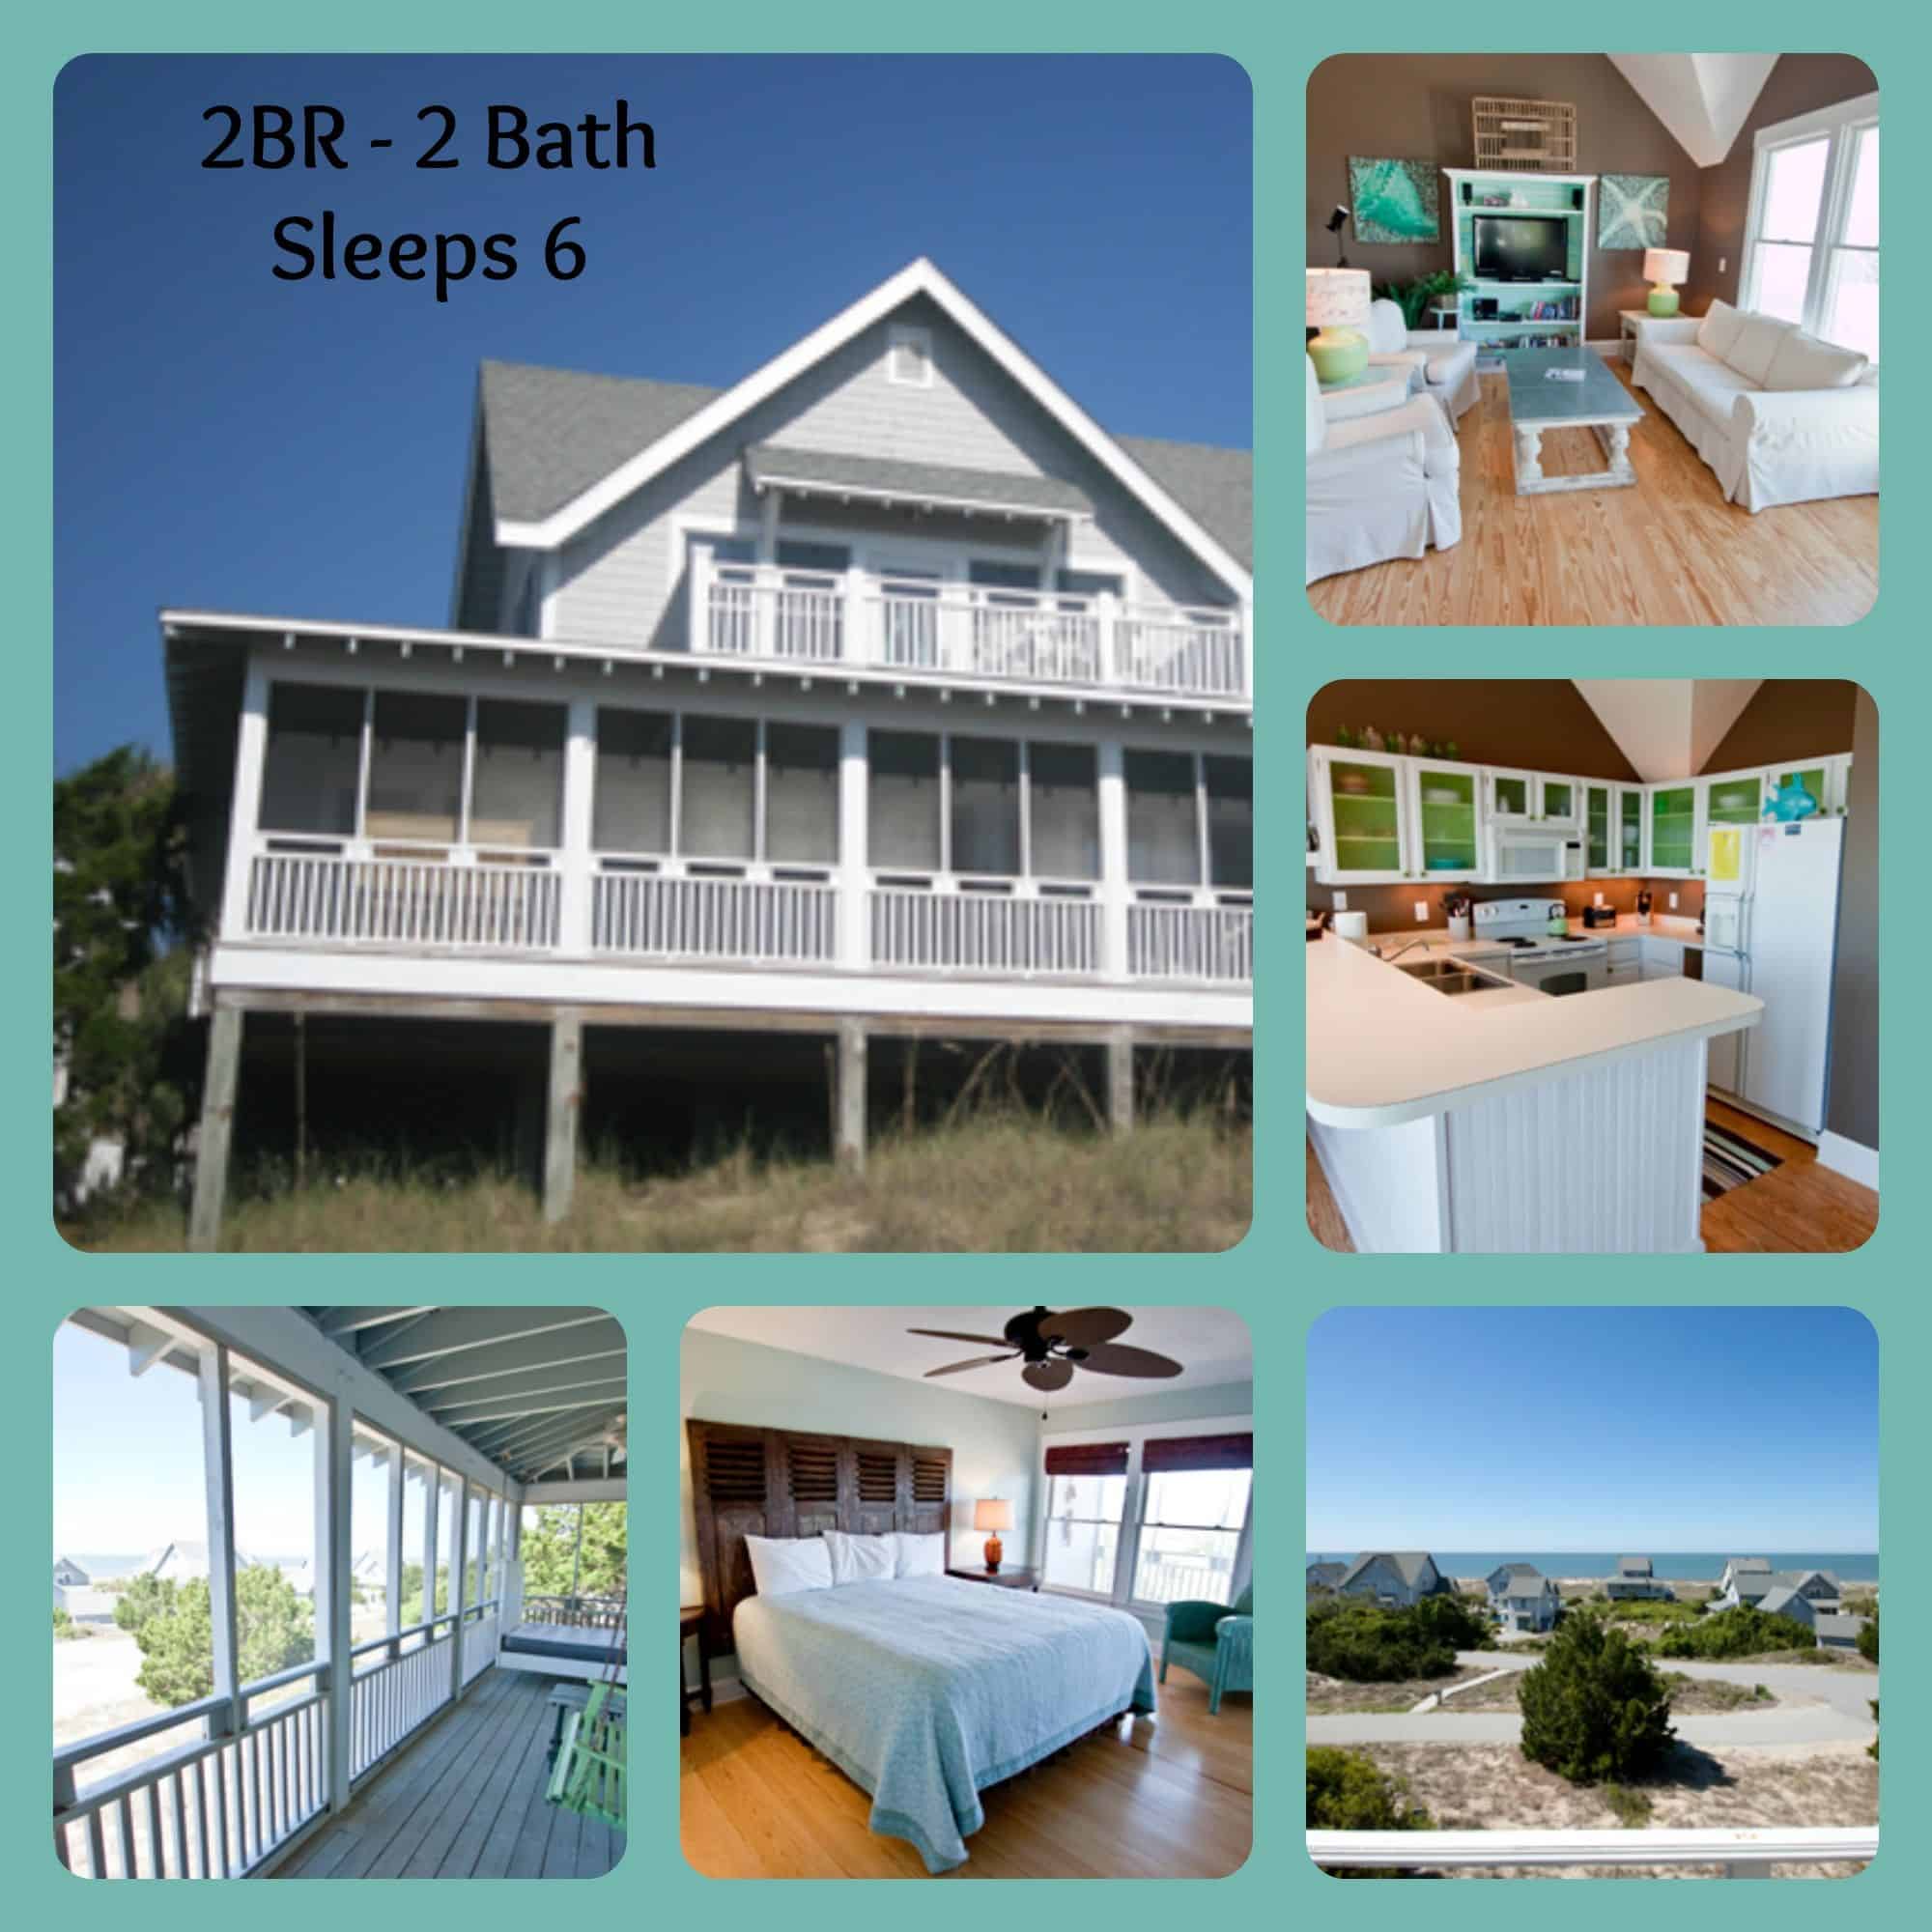 Goneaway Cottage: This Bald Head Island rental is quaint and quiet. It ...